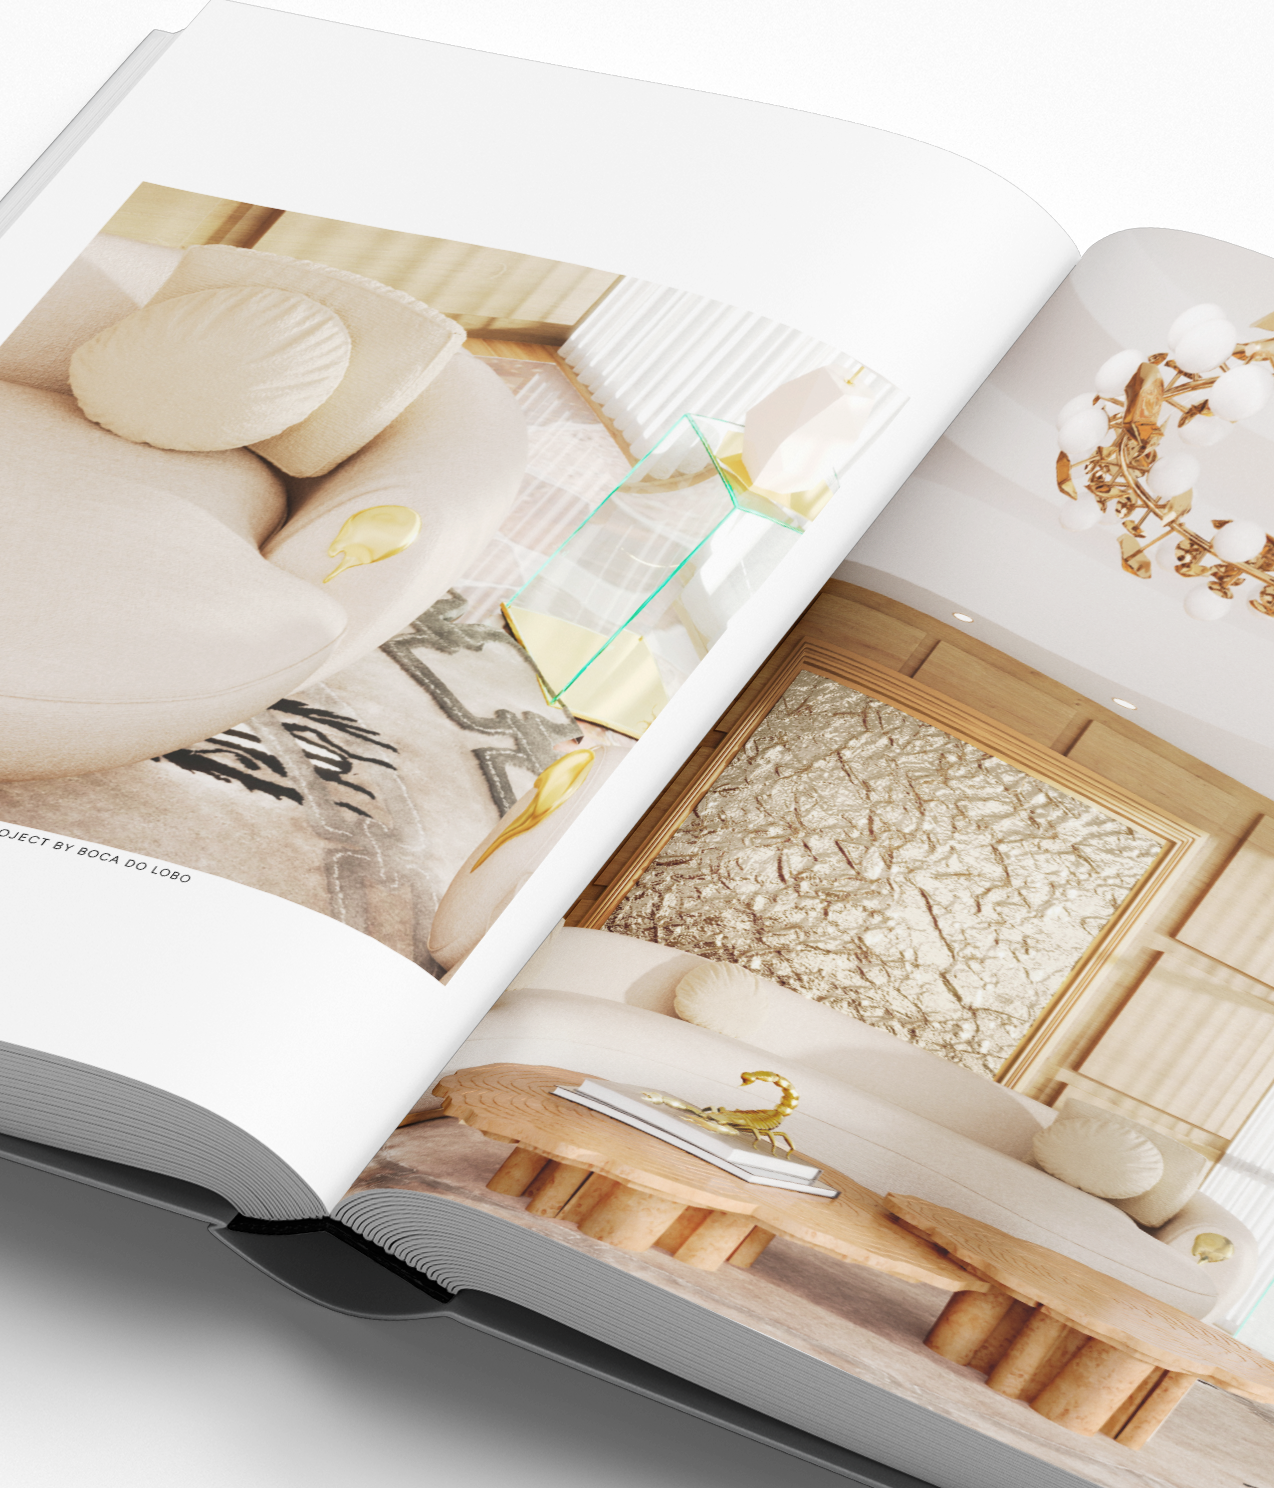 Download Luxury Living Rooms Ebook - Boca do Lobo Catalogues and Ebooks